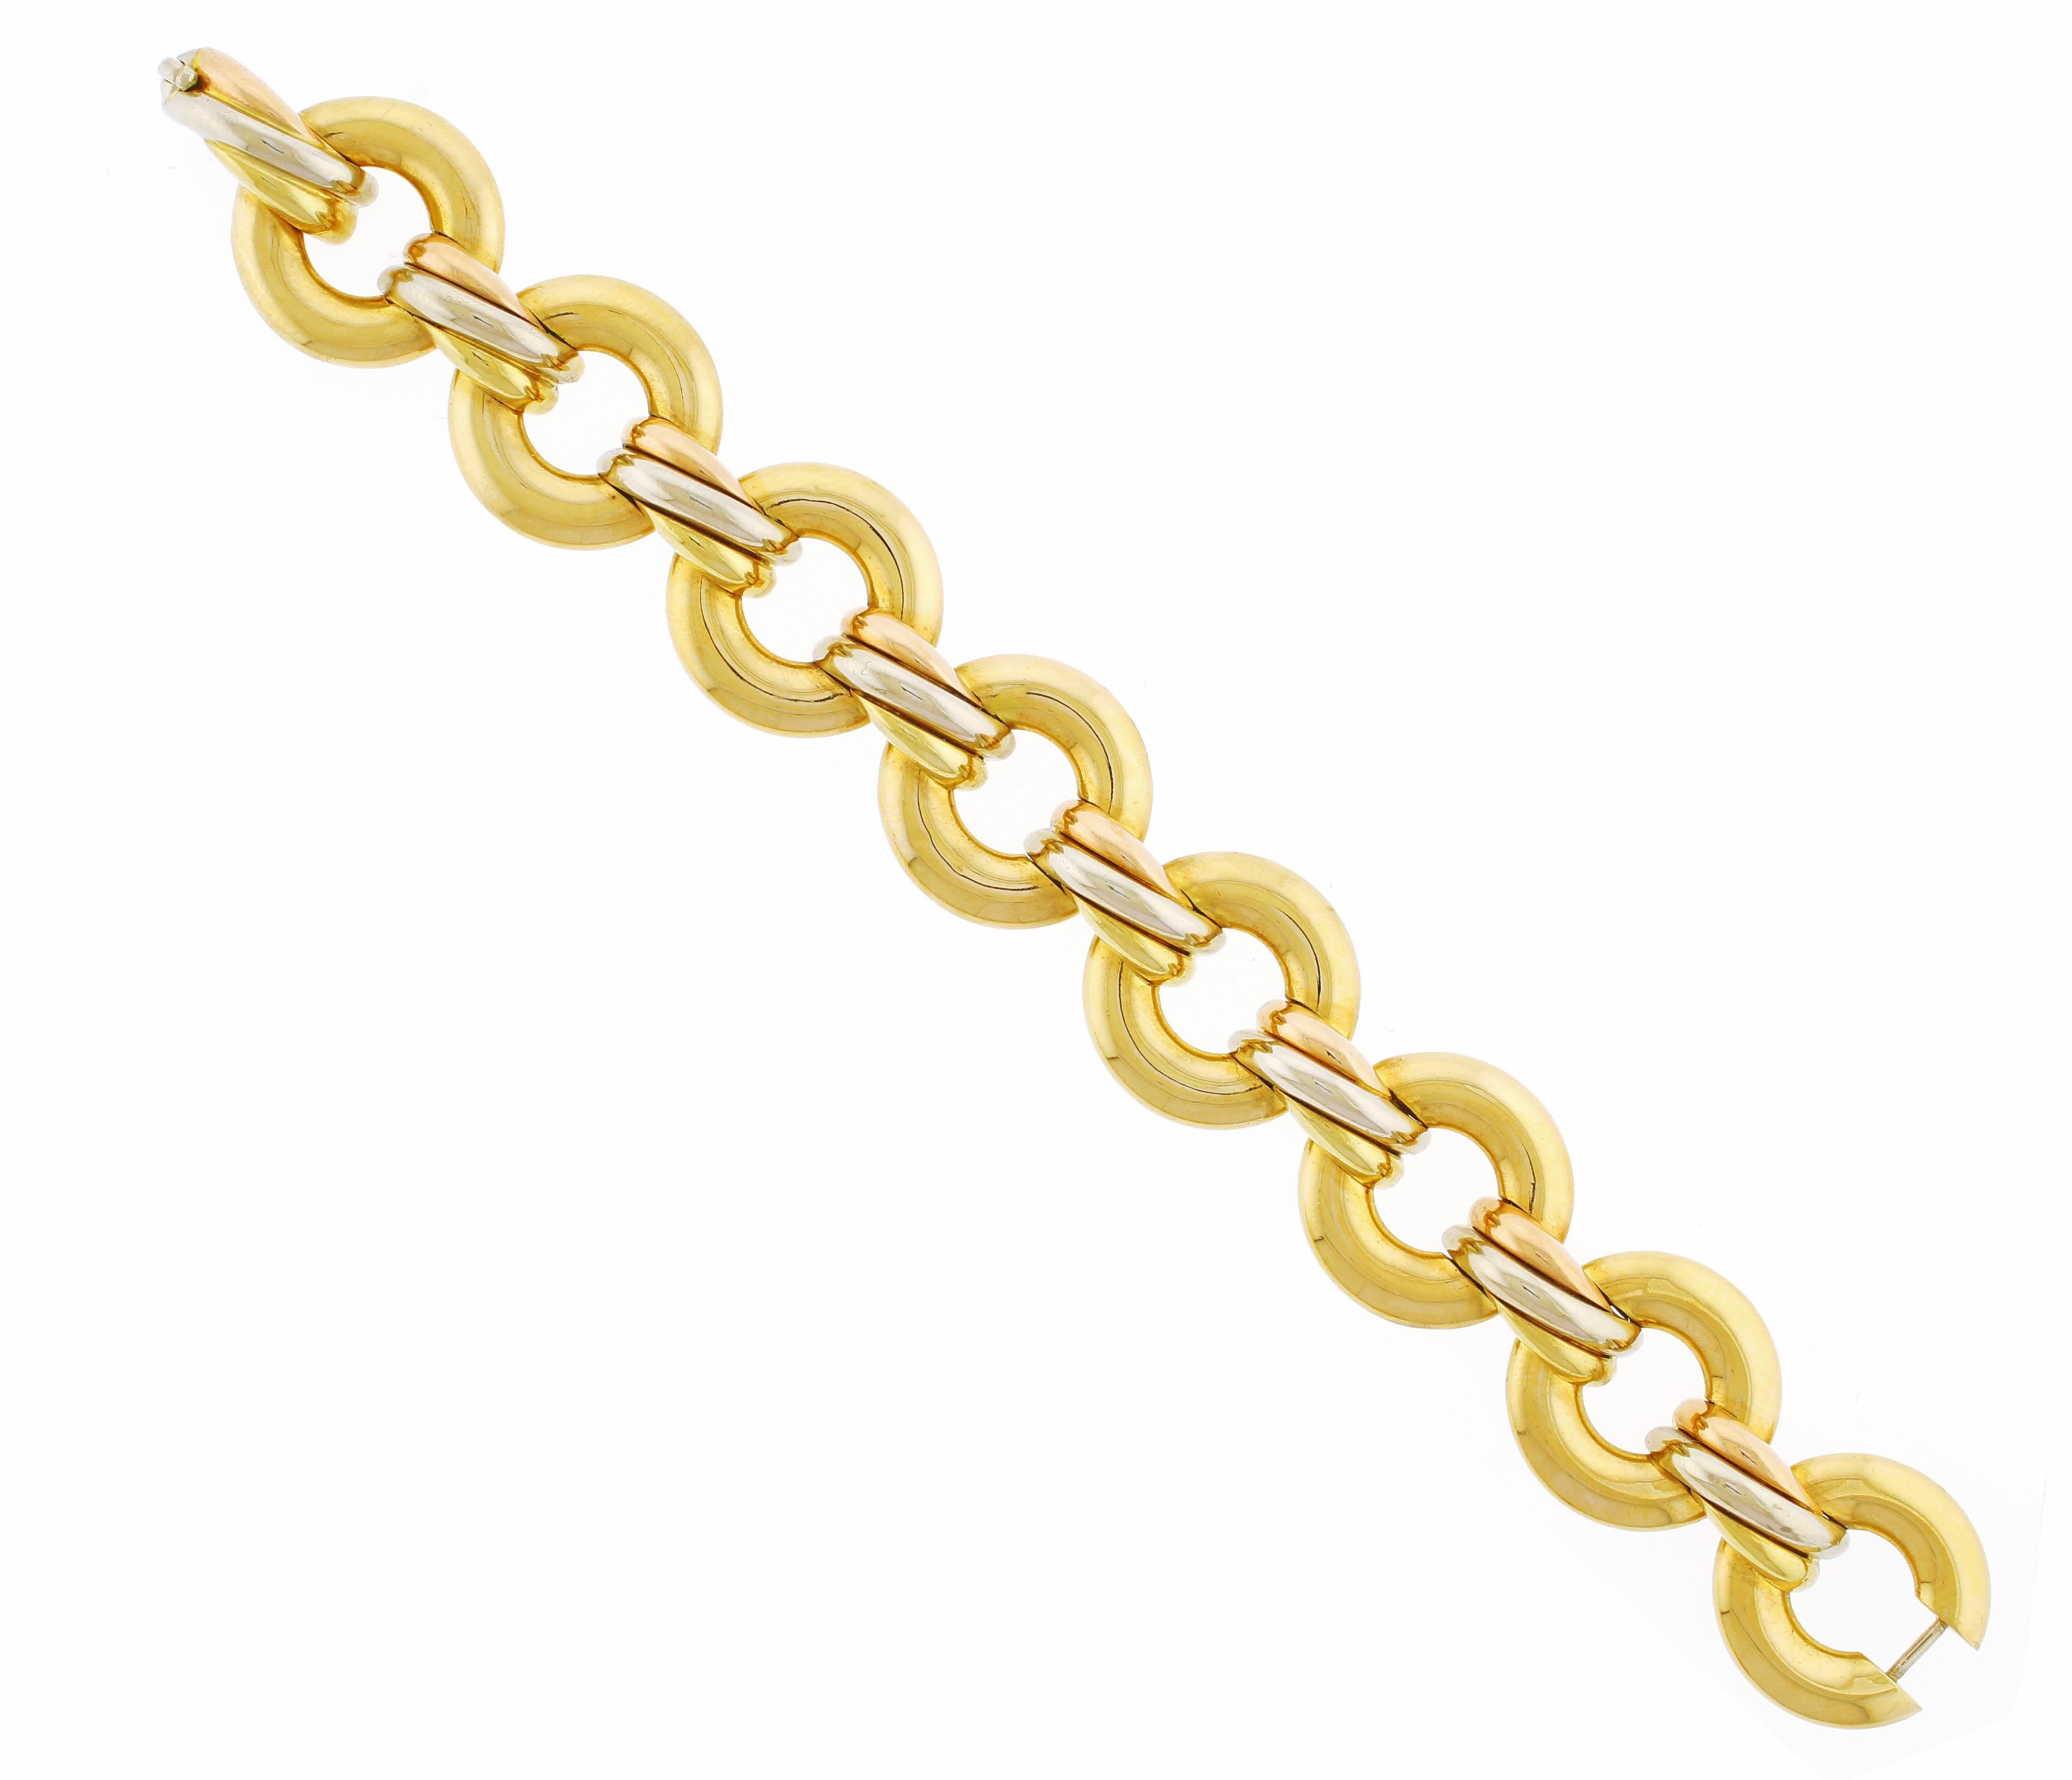 Cartier 18kt Gold Trinity Round Link Bracelet In Excellent Condition For Sale In Bethesda, MD